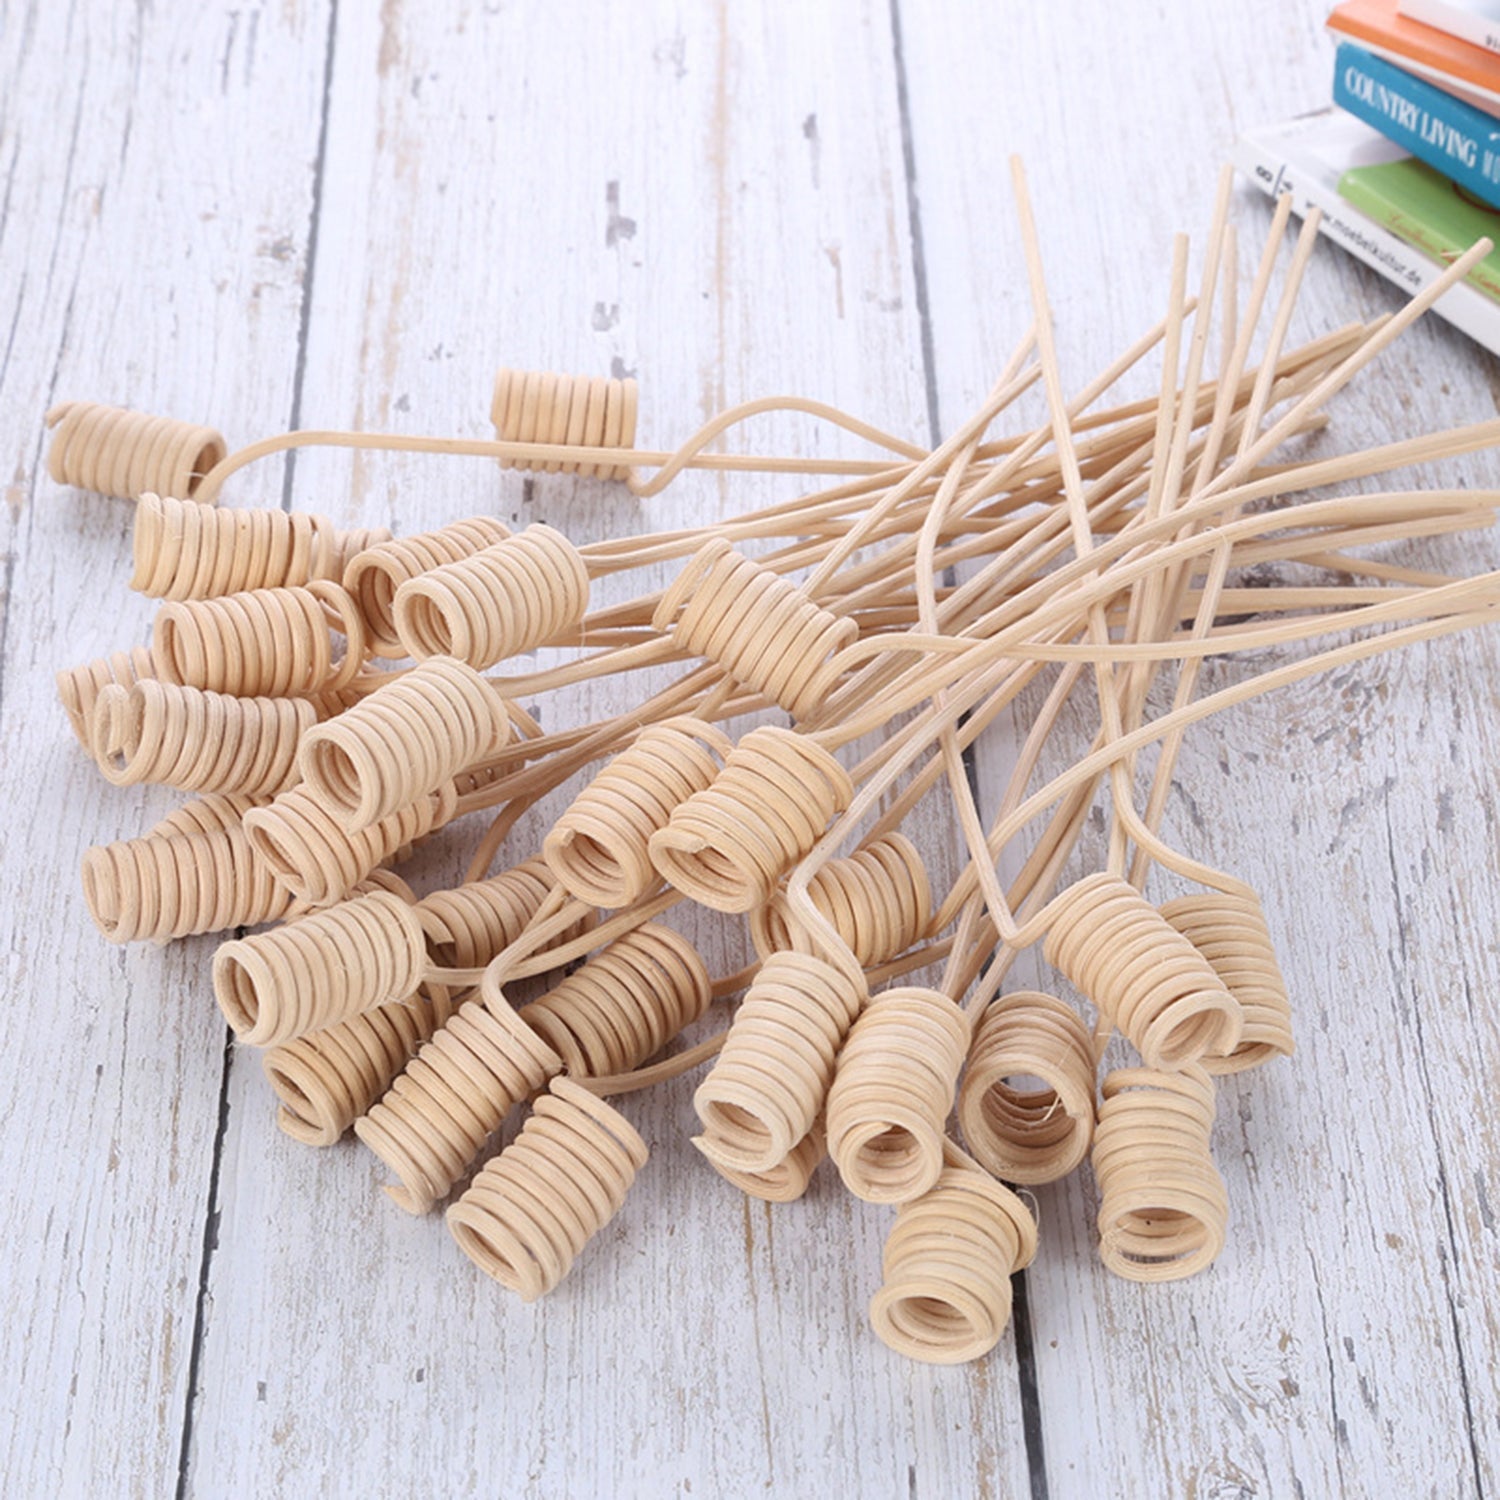 Rattan Reed Sticks Special Waving Rolled Rattan Stick/Ball For Reed Diffuser Reed Diffuser Accessories OEM 